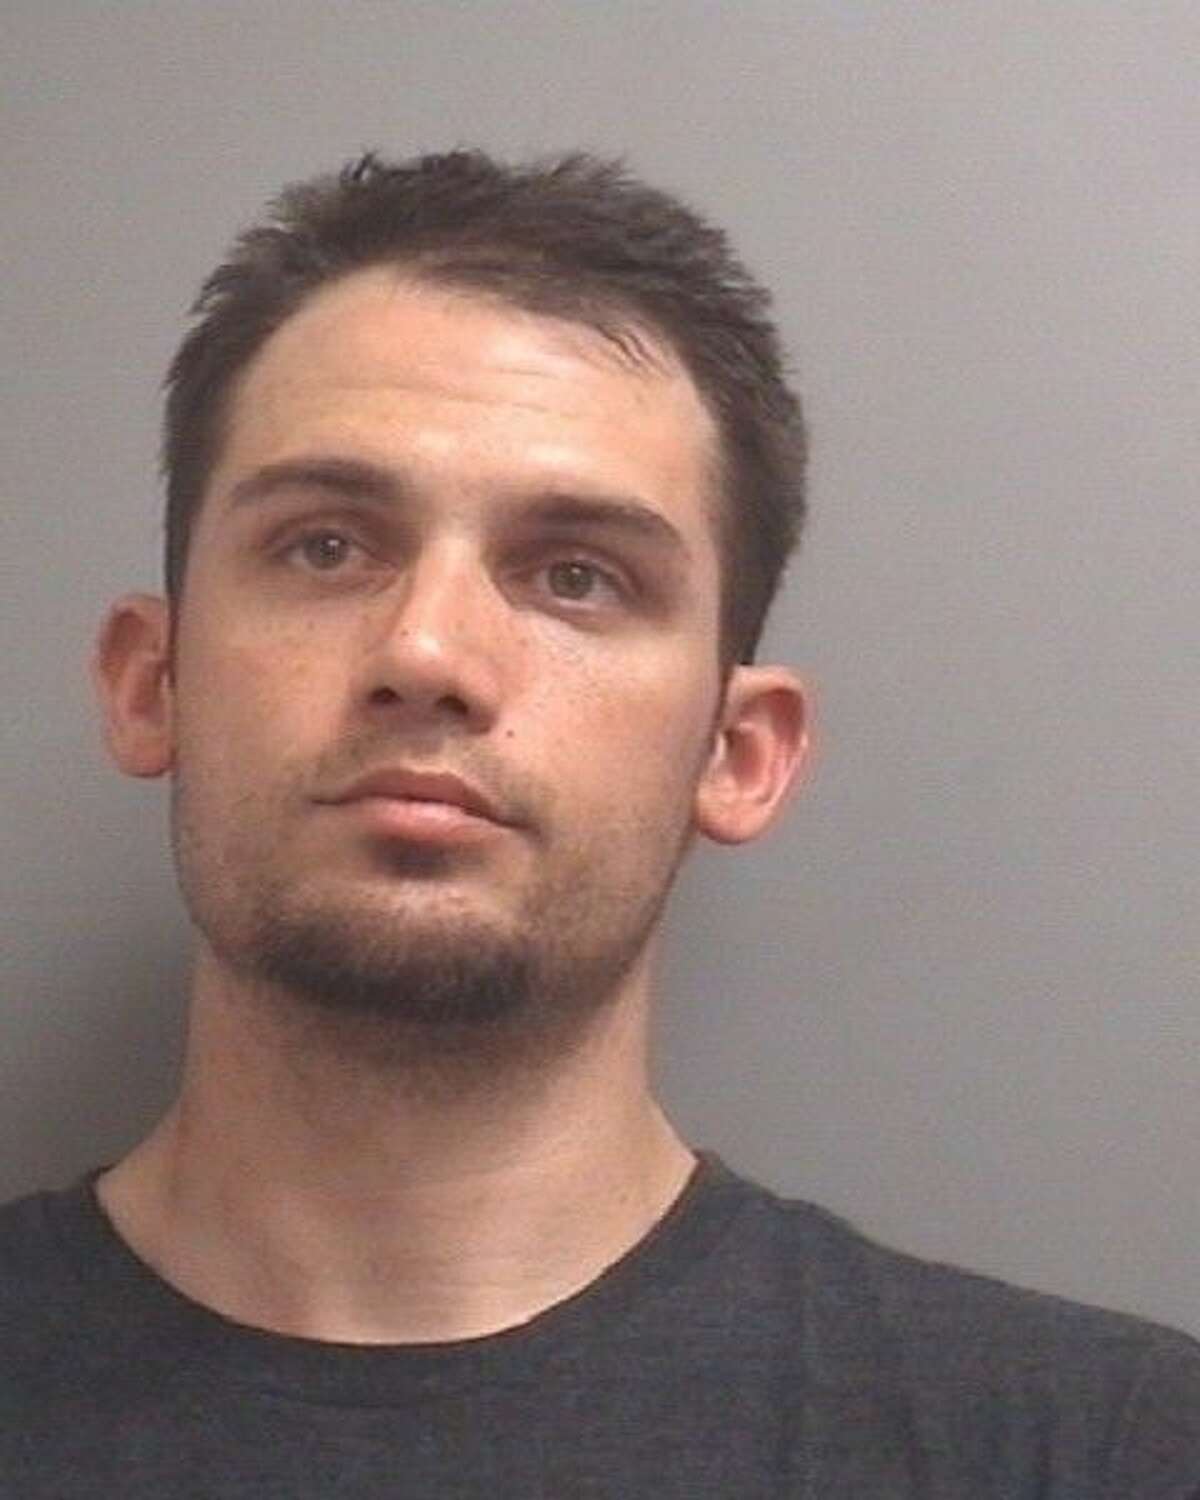 Justin Blake Smith, 30, was arrested by La Porte Police on April 29 on three felony charges of possession of a controlled substance. Warrants for his arrest were recently filed after he failed to appear in court last month.